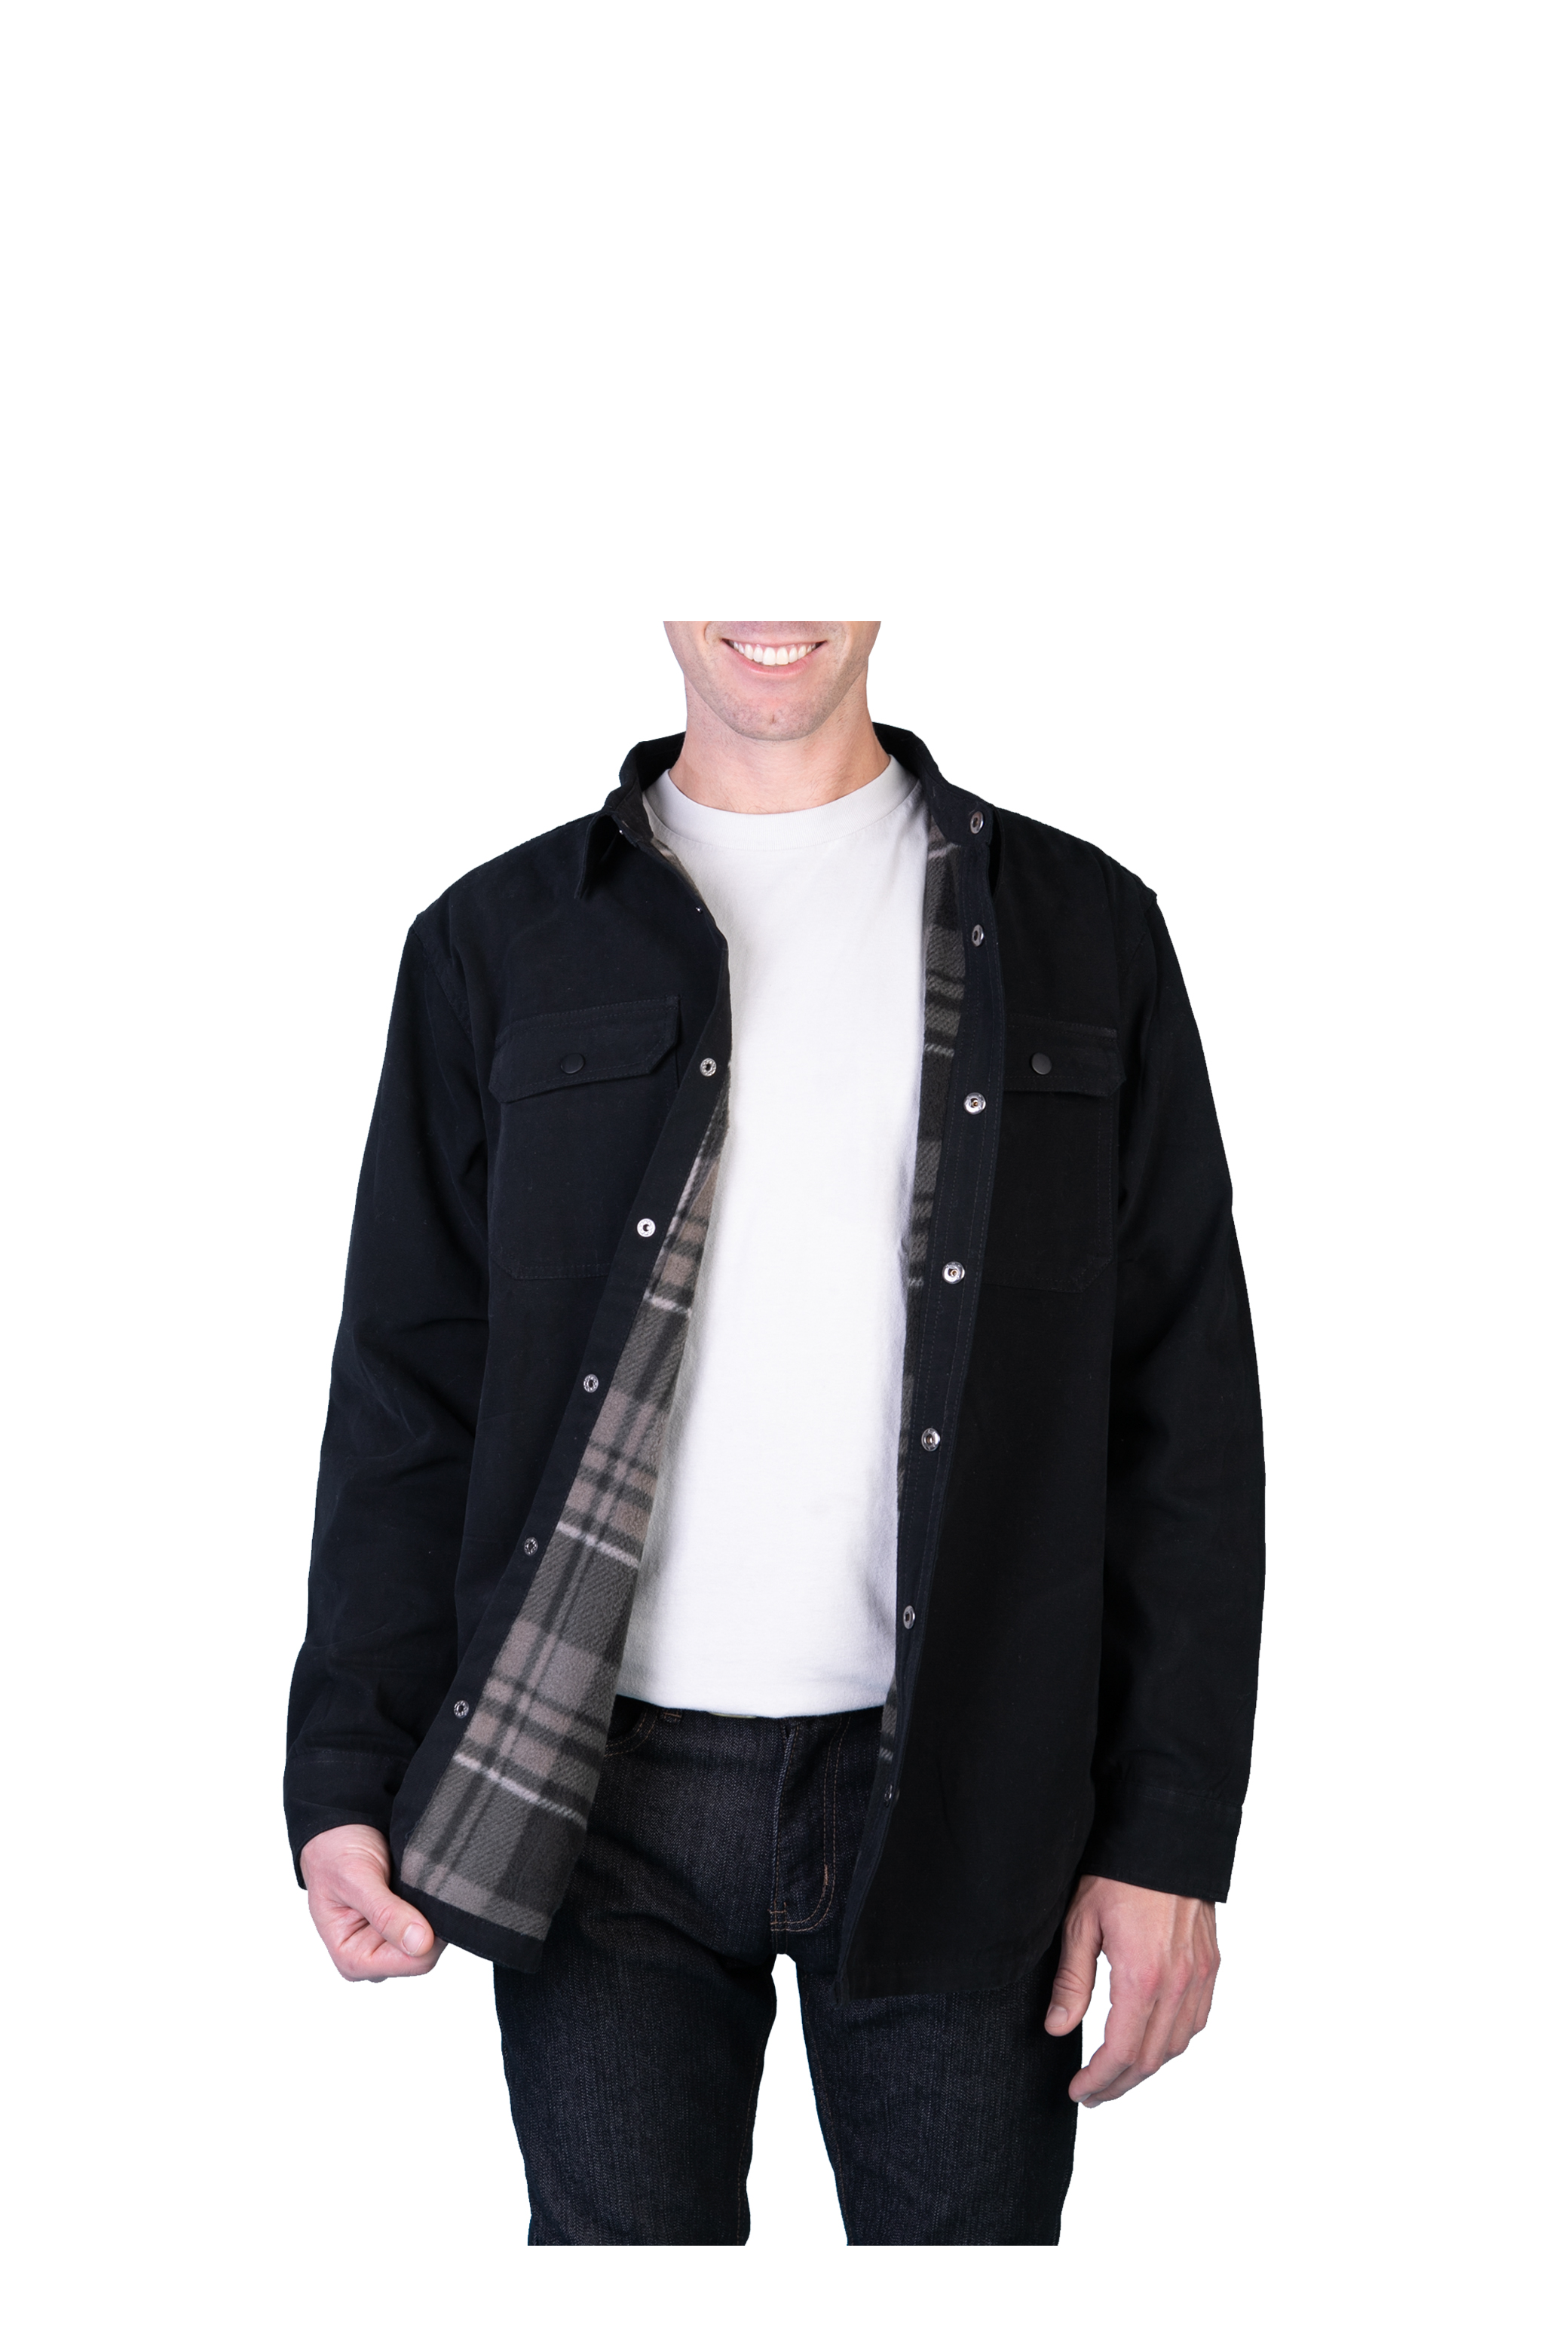 Maxxsel Washed Cotton Canvas Shirt Jacket Lined With Plaid Flannel (S - 3XL)